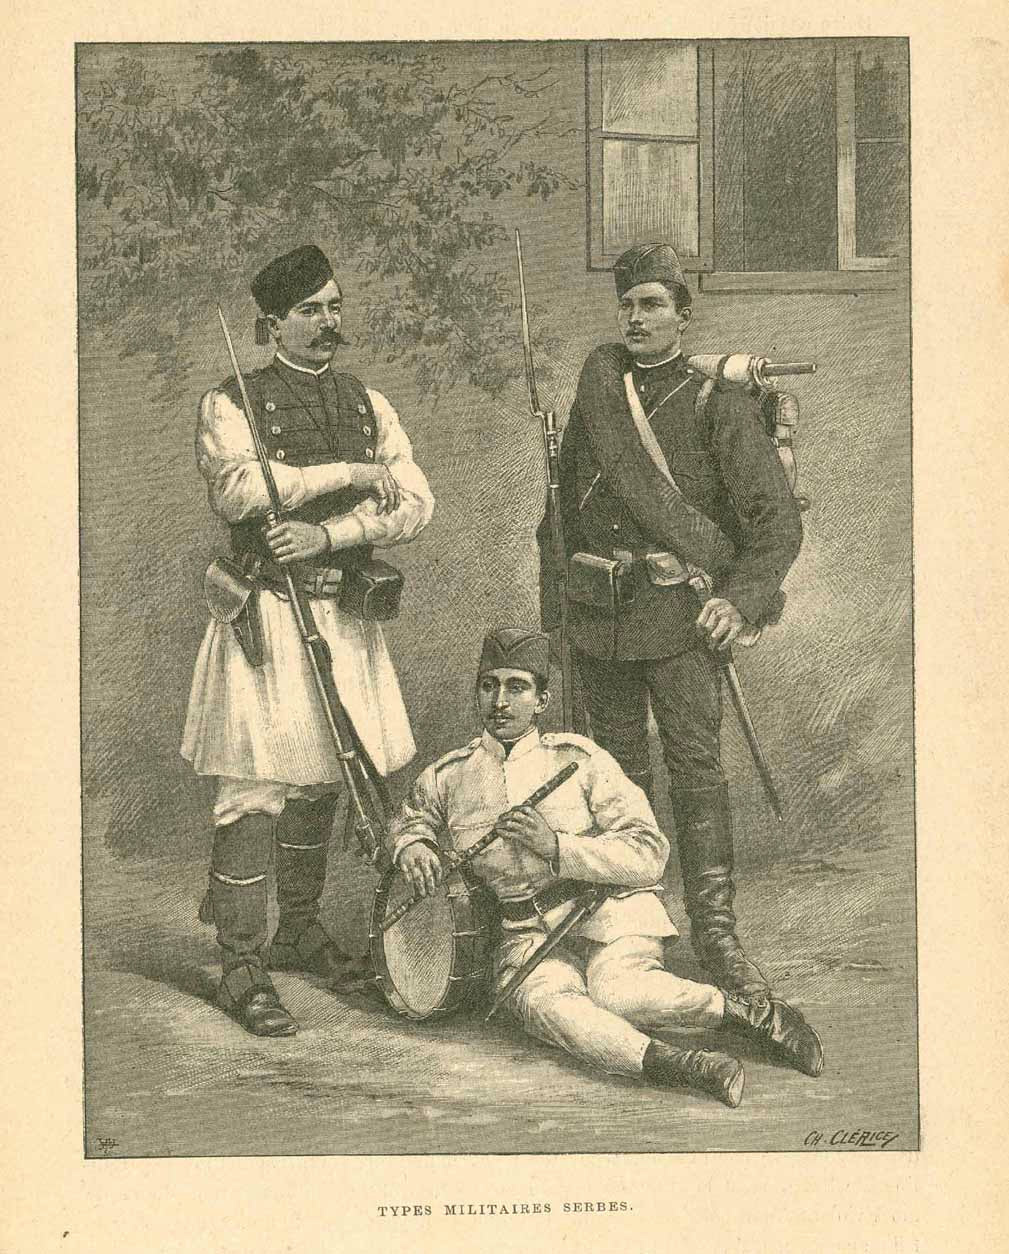 Original antique print  Peoples, Serbia, Serbs, Soldiers, "Types Militaires Serbs"  Wood engraving published ca 1890. On the reverse side is text about Montenegro and the land along the Adriatic Sea.